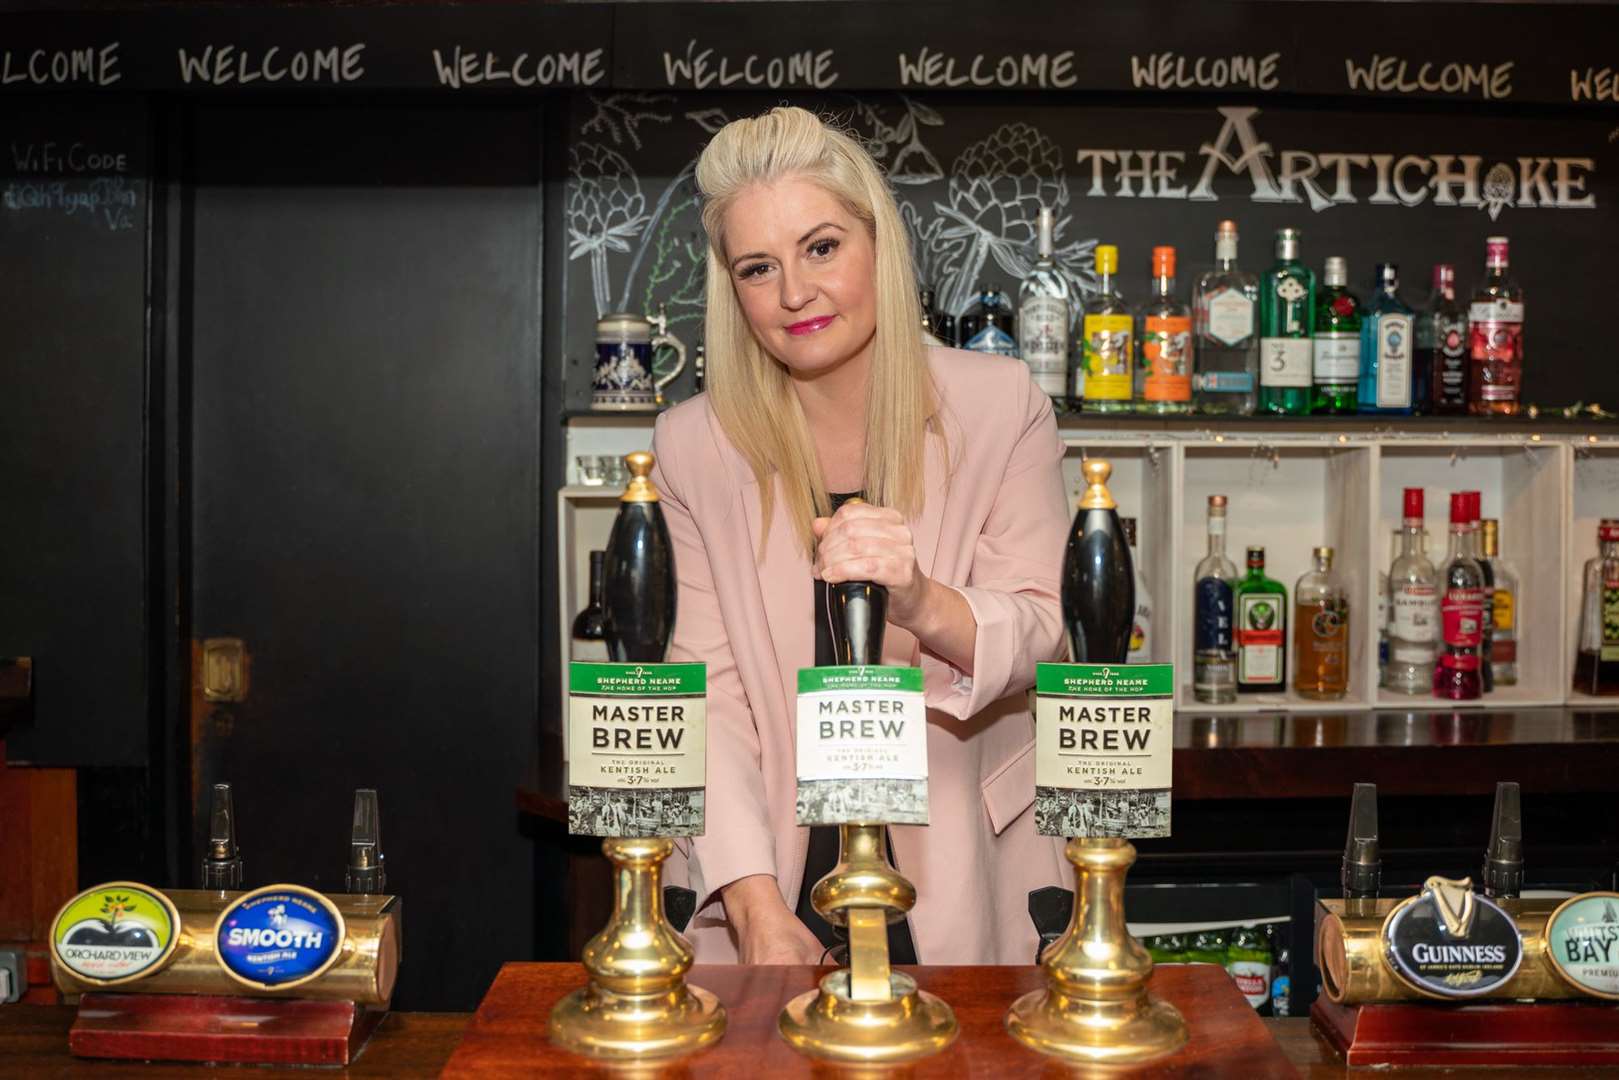 Holly Millin is the new licensee at the pub